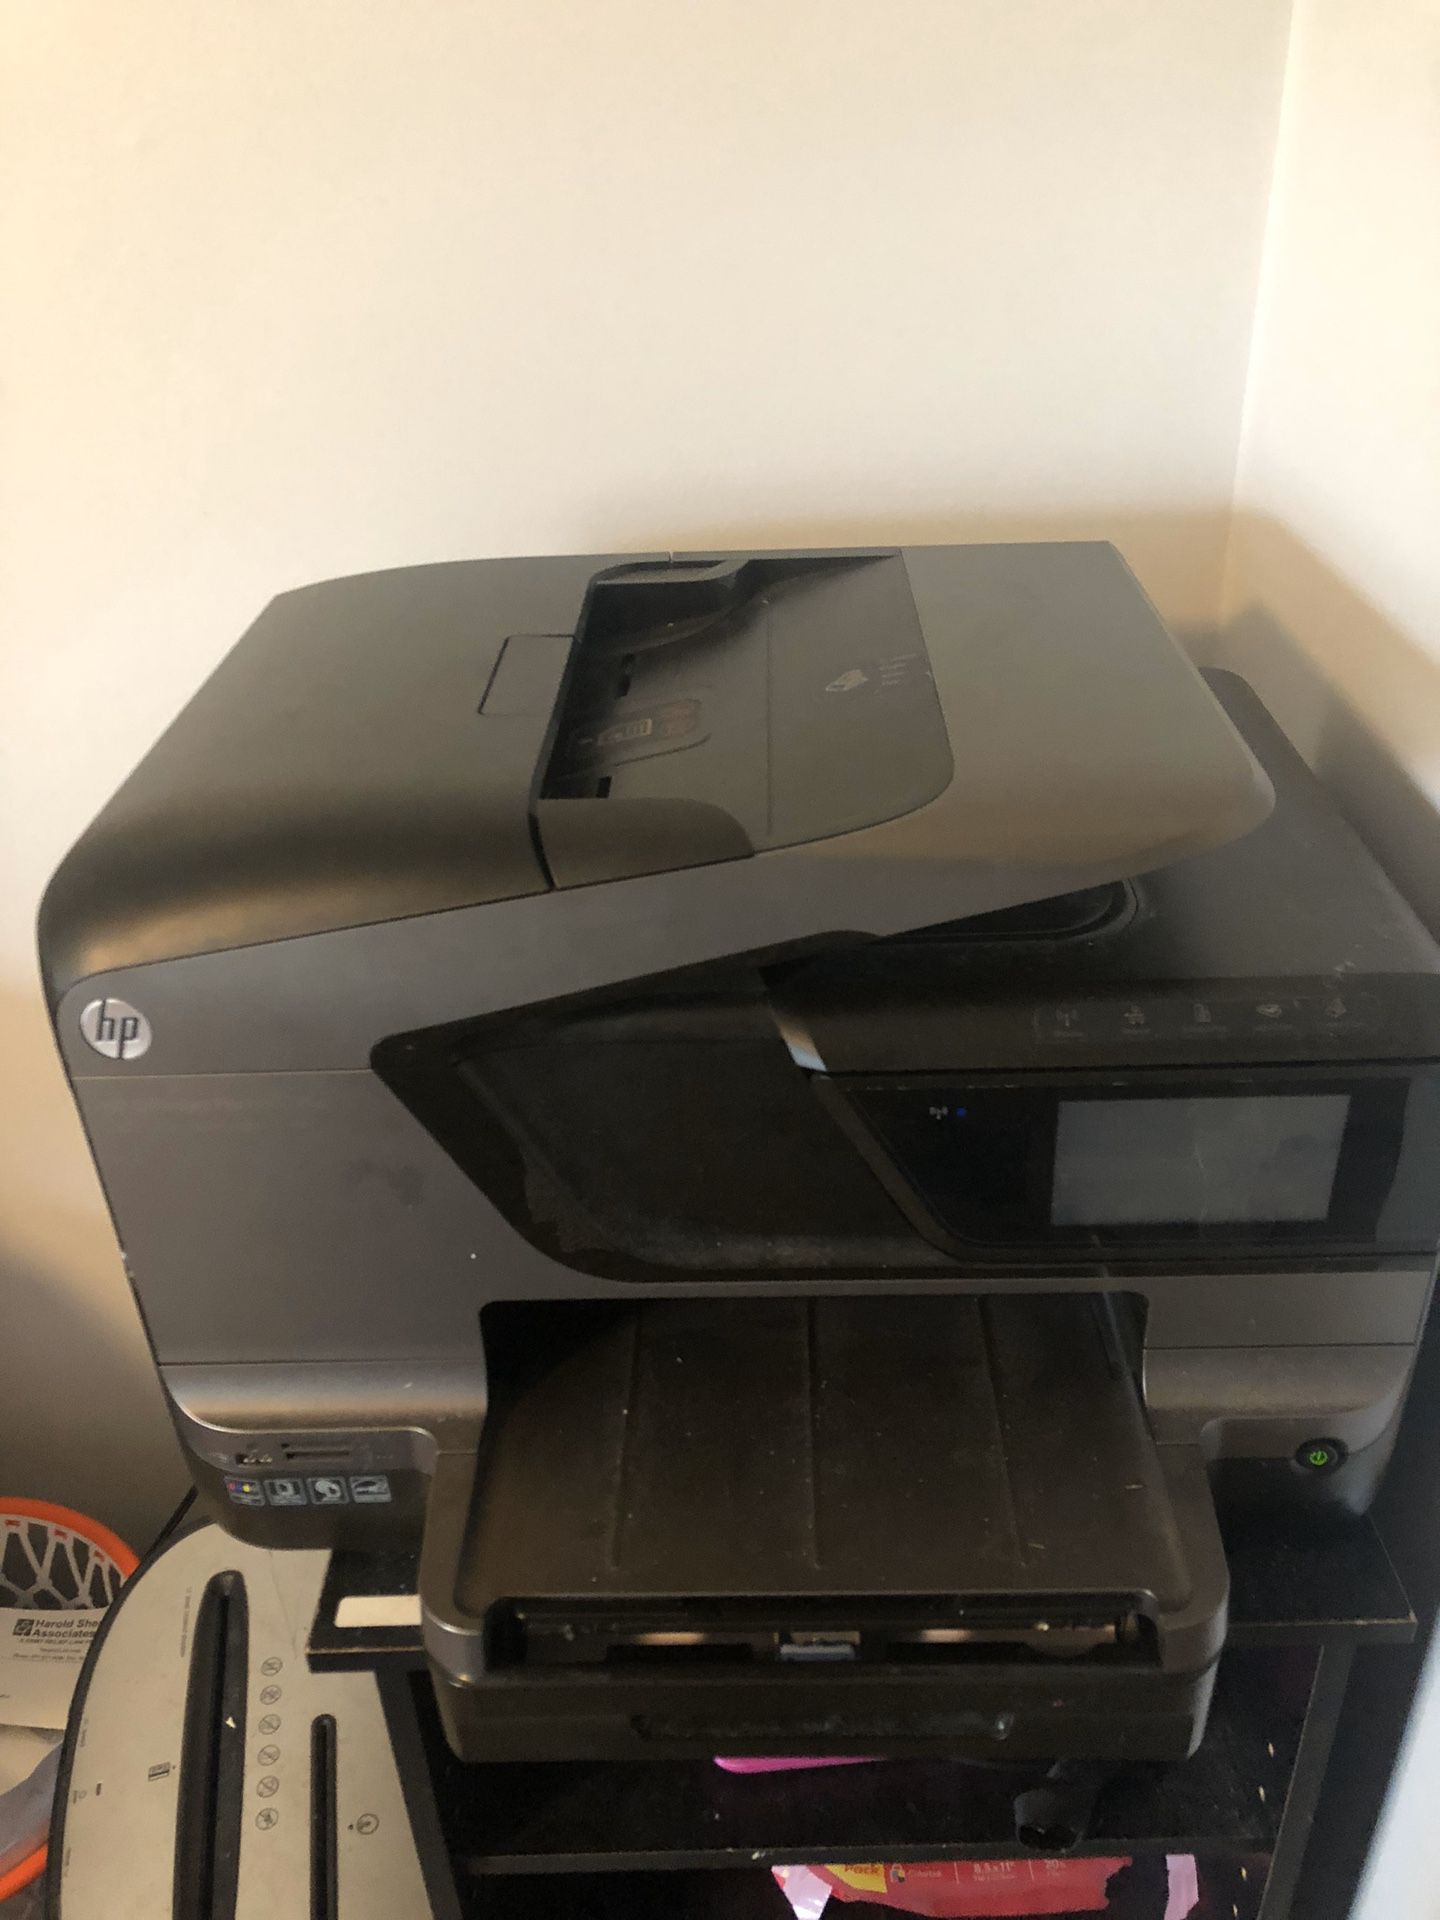 HP printer with box of ink